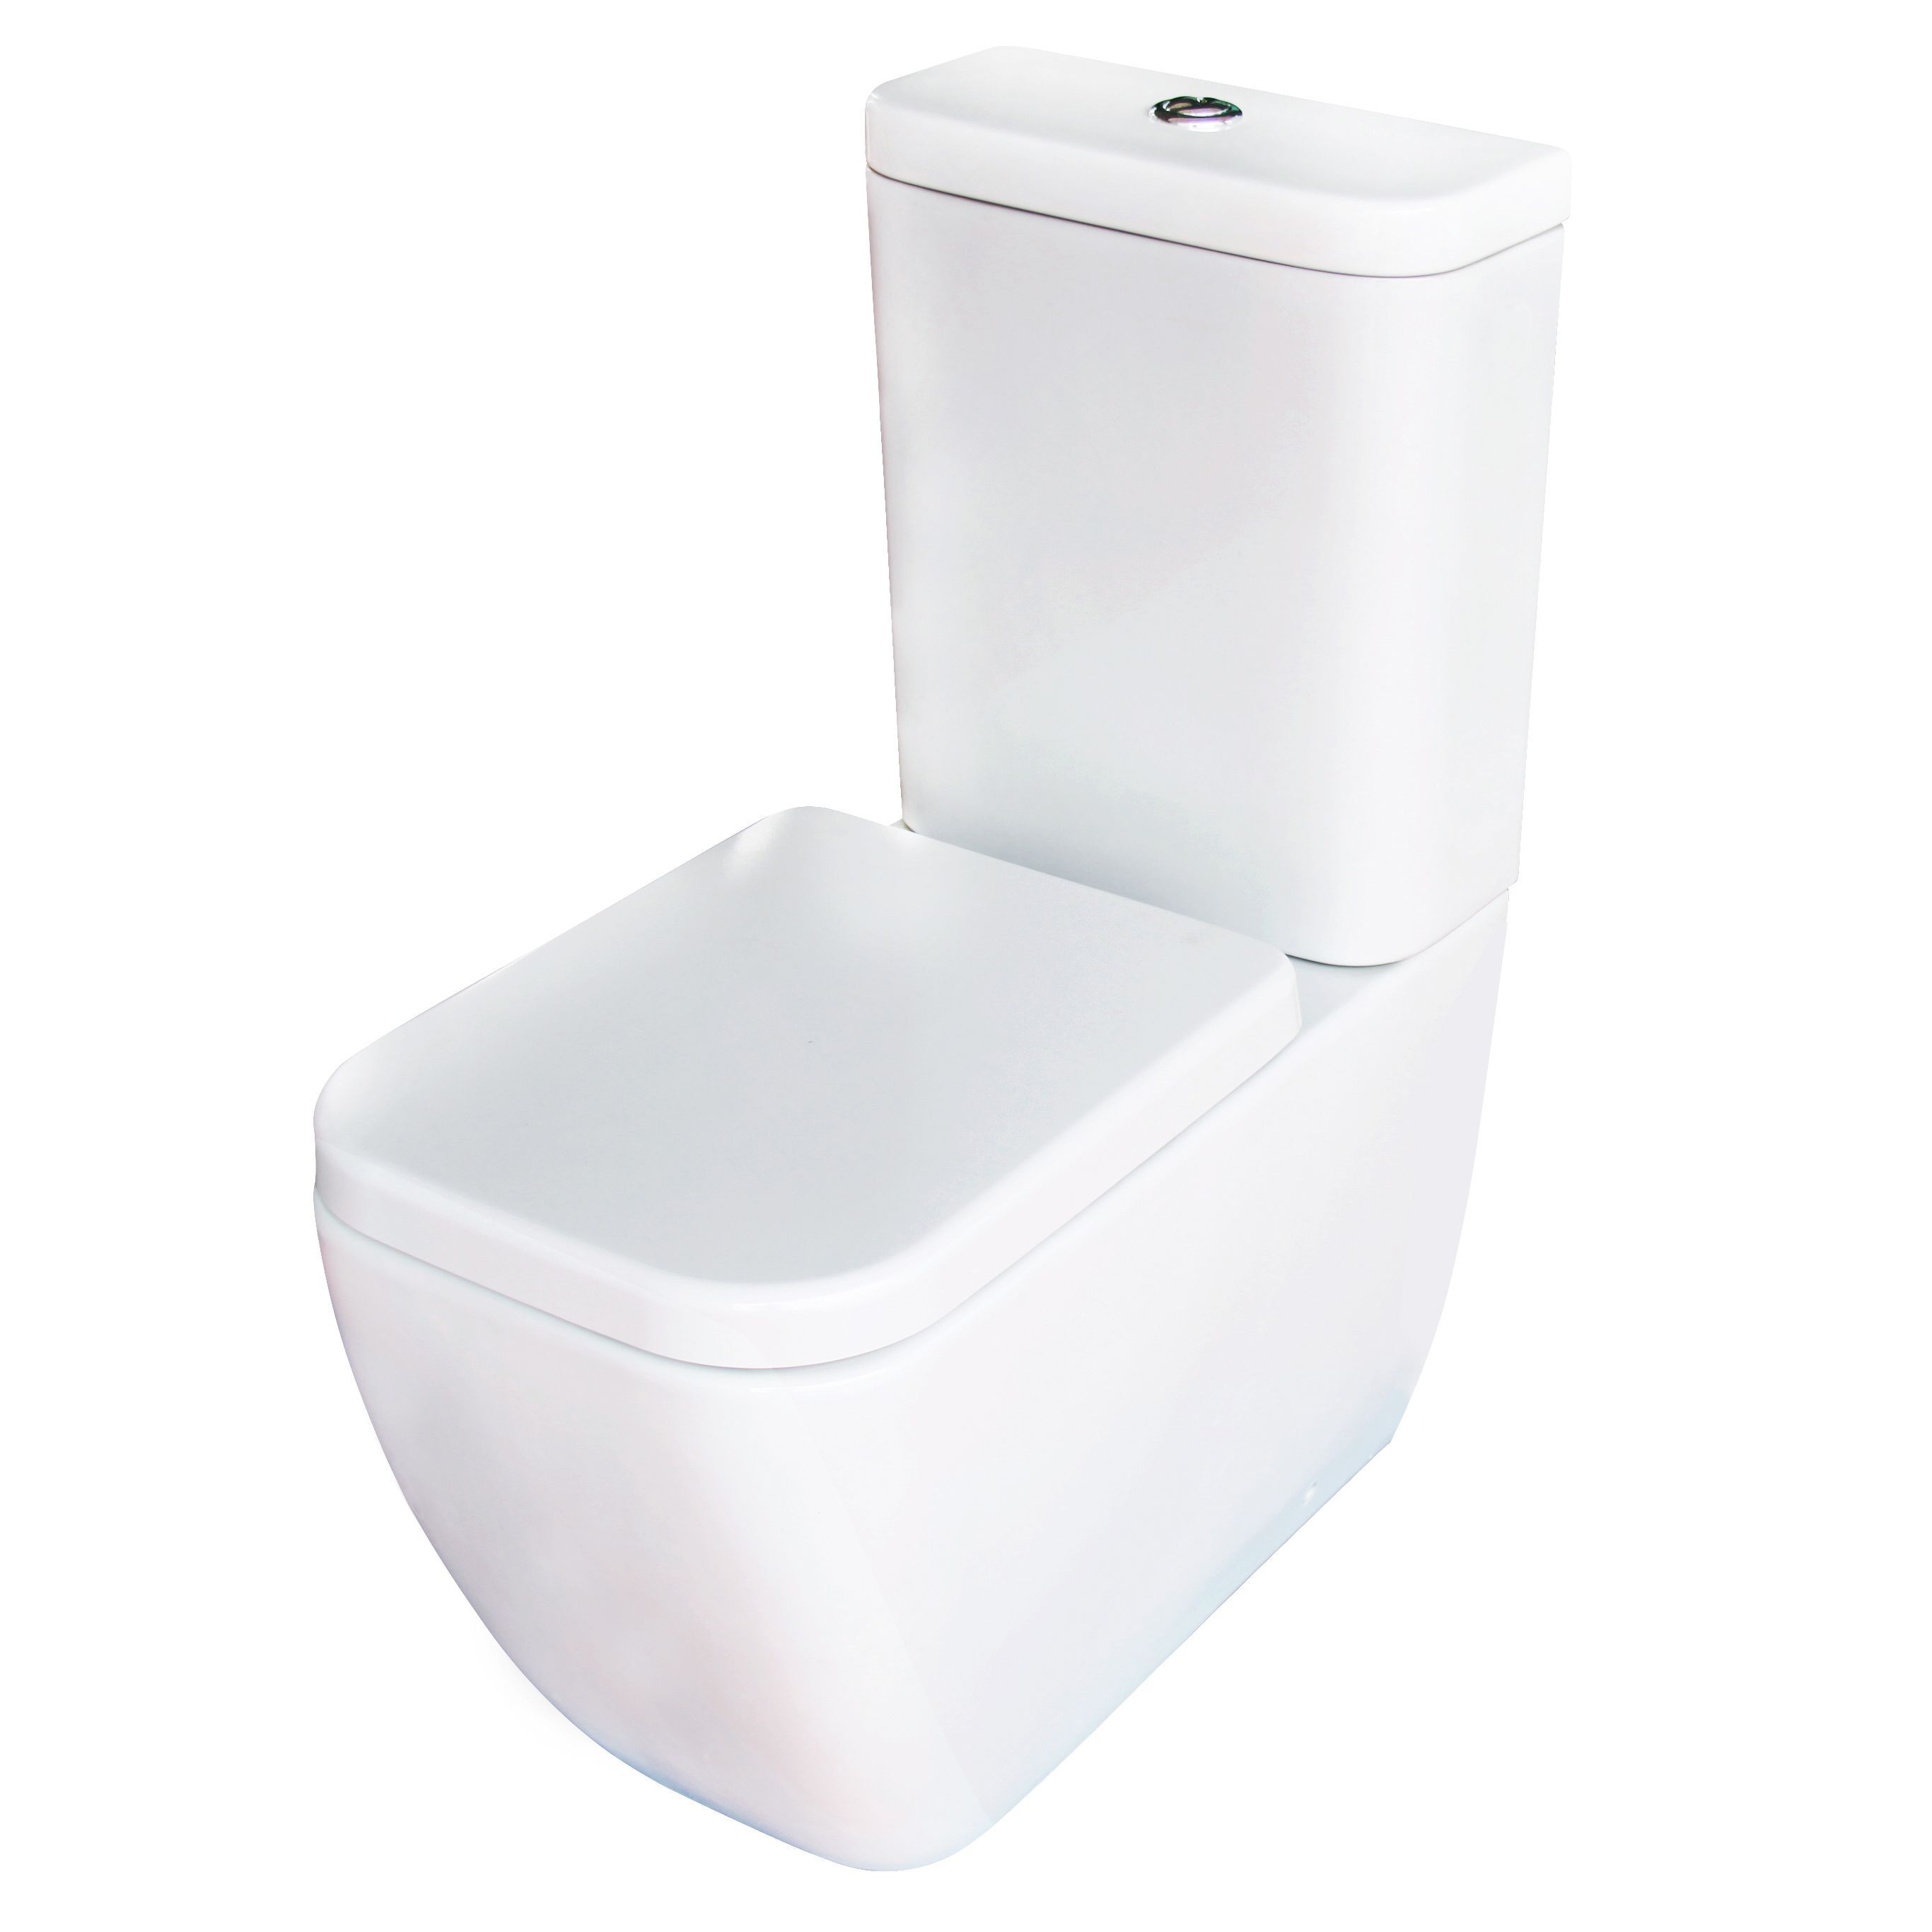 GoodHome Affini White Close-coupled Wall & floor mounted Toilet & full pedestal basin (W)370mm (H)850mm